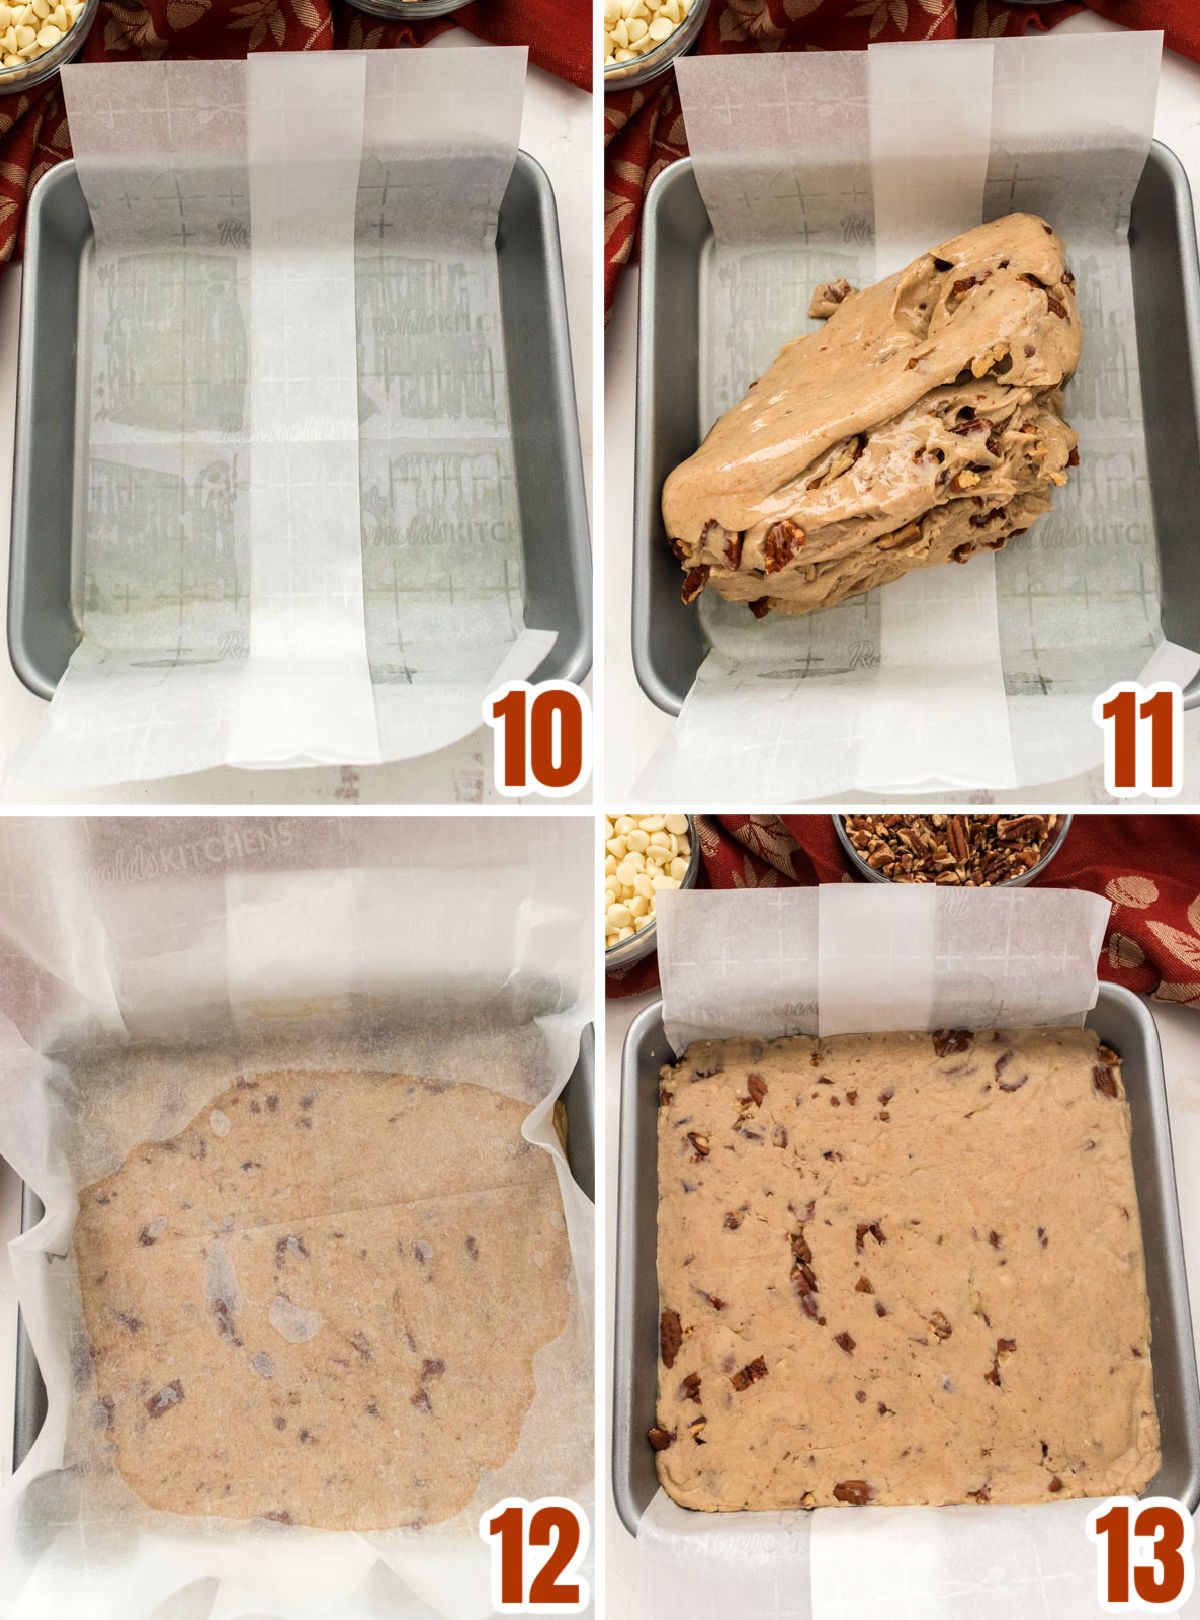 Collage image showing how to press the fudge into the 8x8" baking pan.